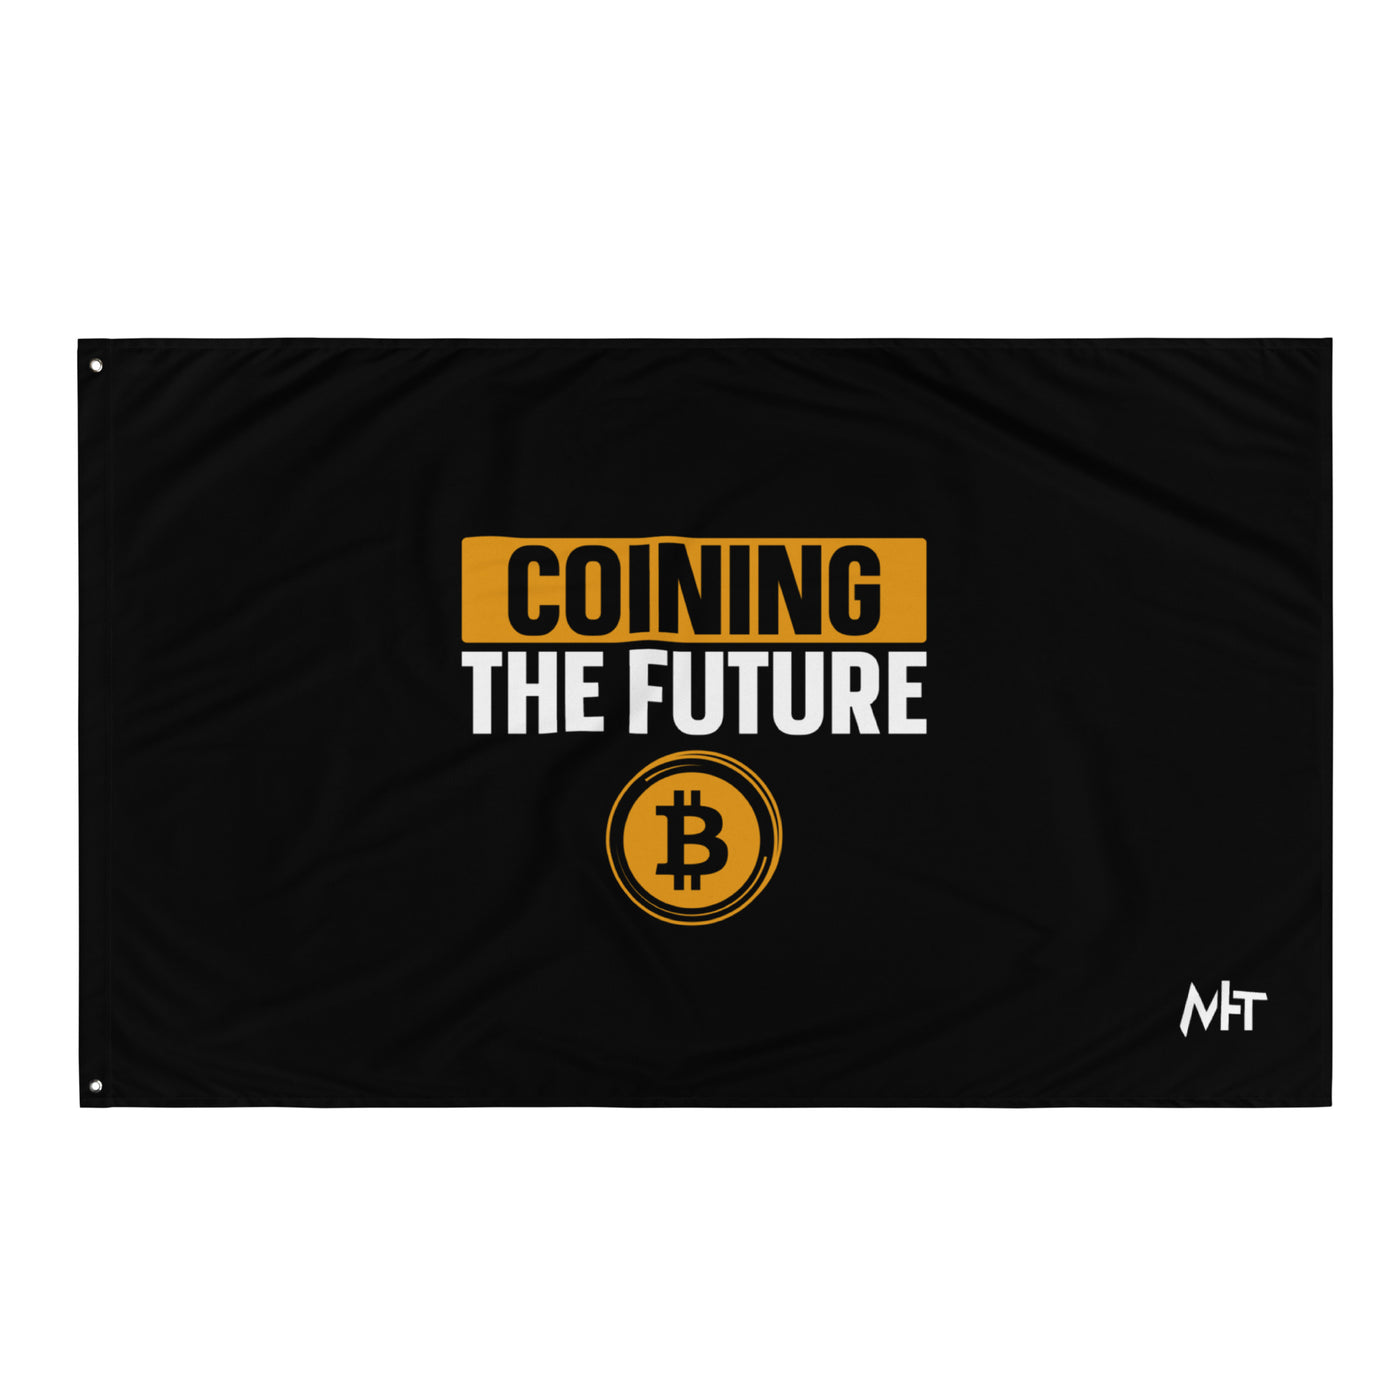 Coining The Future Flag